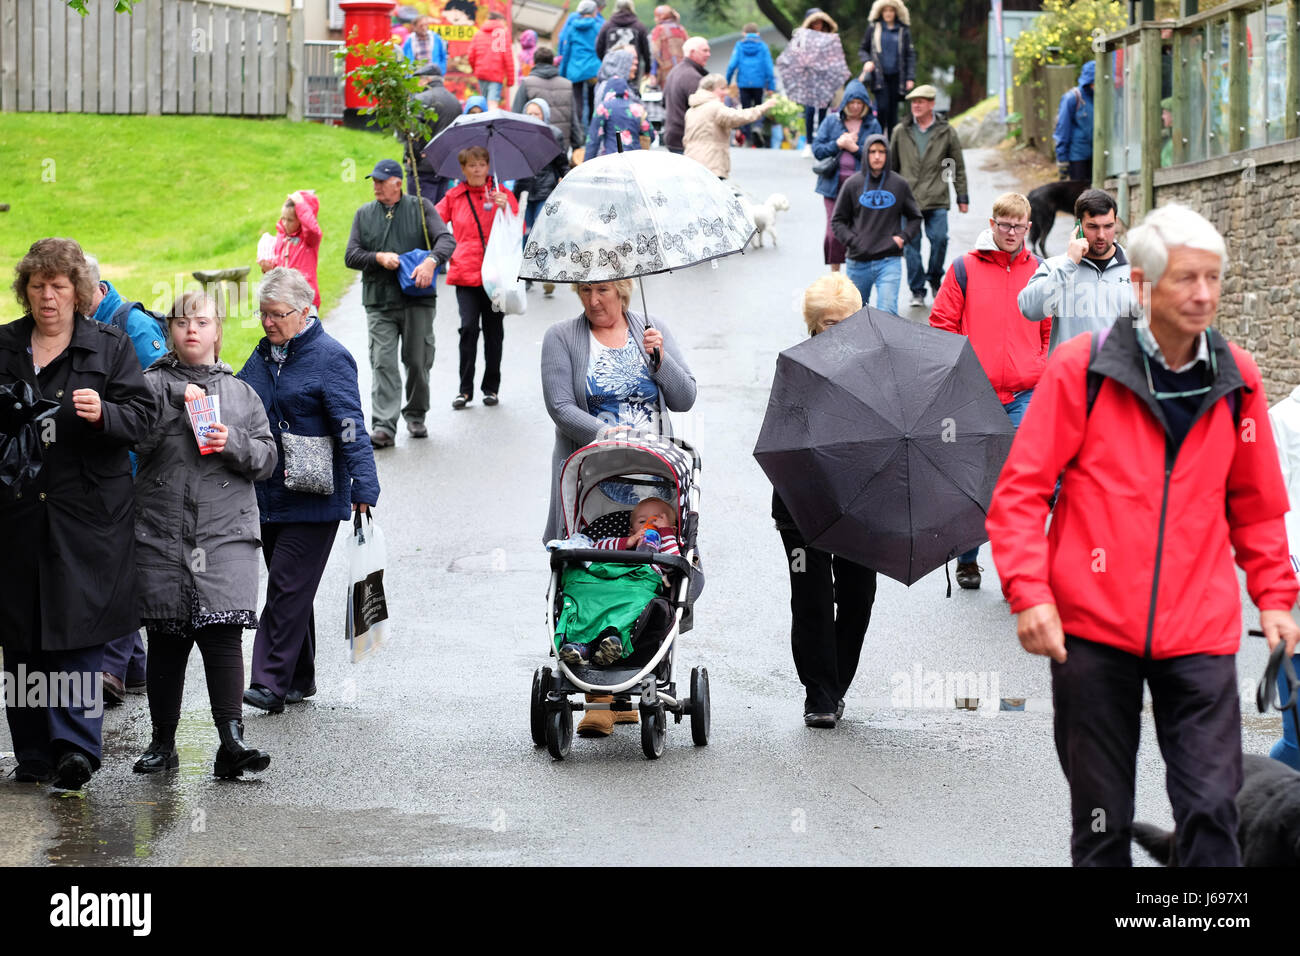 Royal Welsh Spring Festival, Builth Wells, Powys, Wales - May 2017 - Visitors  dodge a heavy shower at the Royal Welsh Spring Festival on a day of sunshine and showers in Mid Wales. Photo Steven May / Alamy Live News Stock Photo